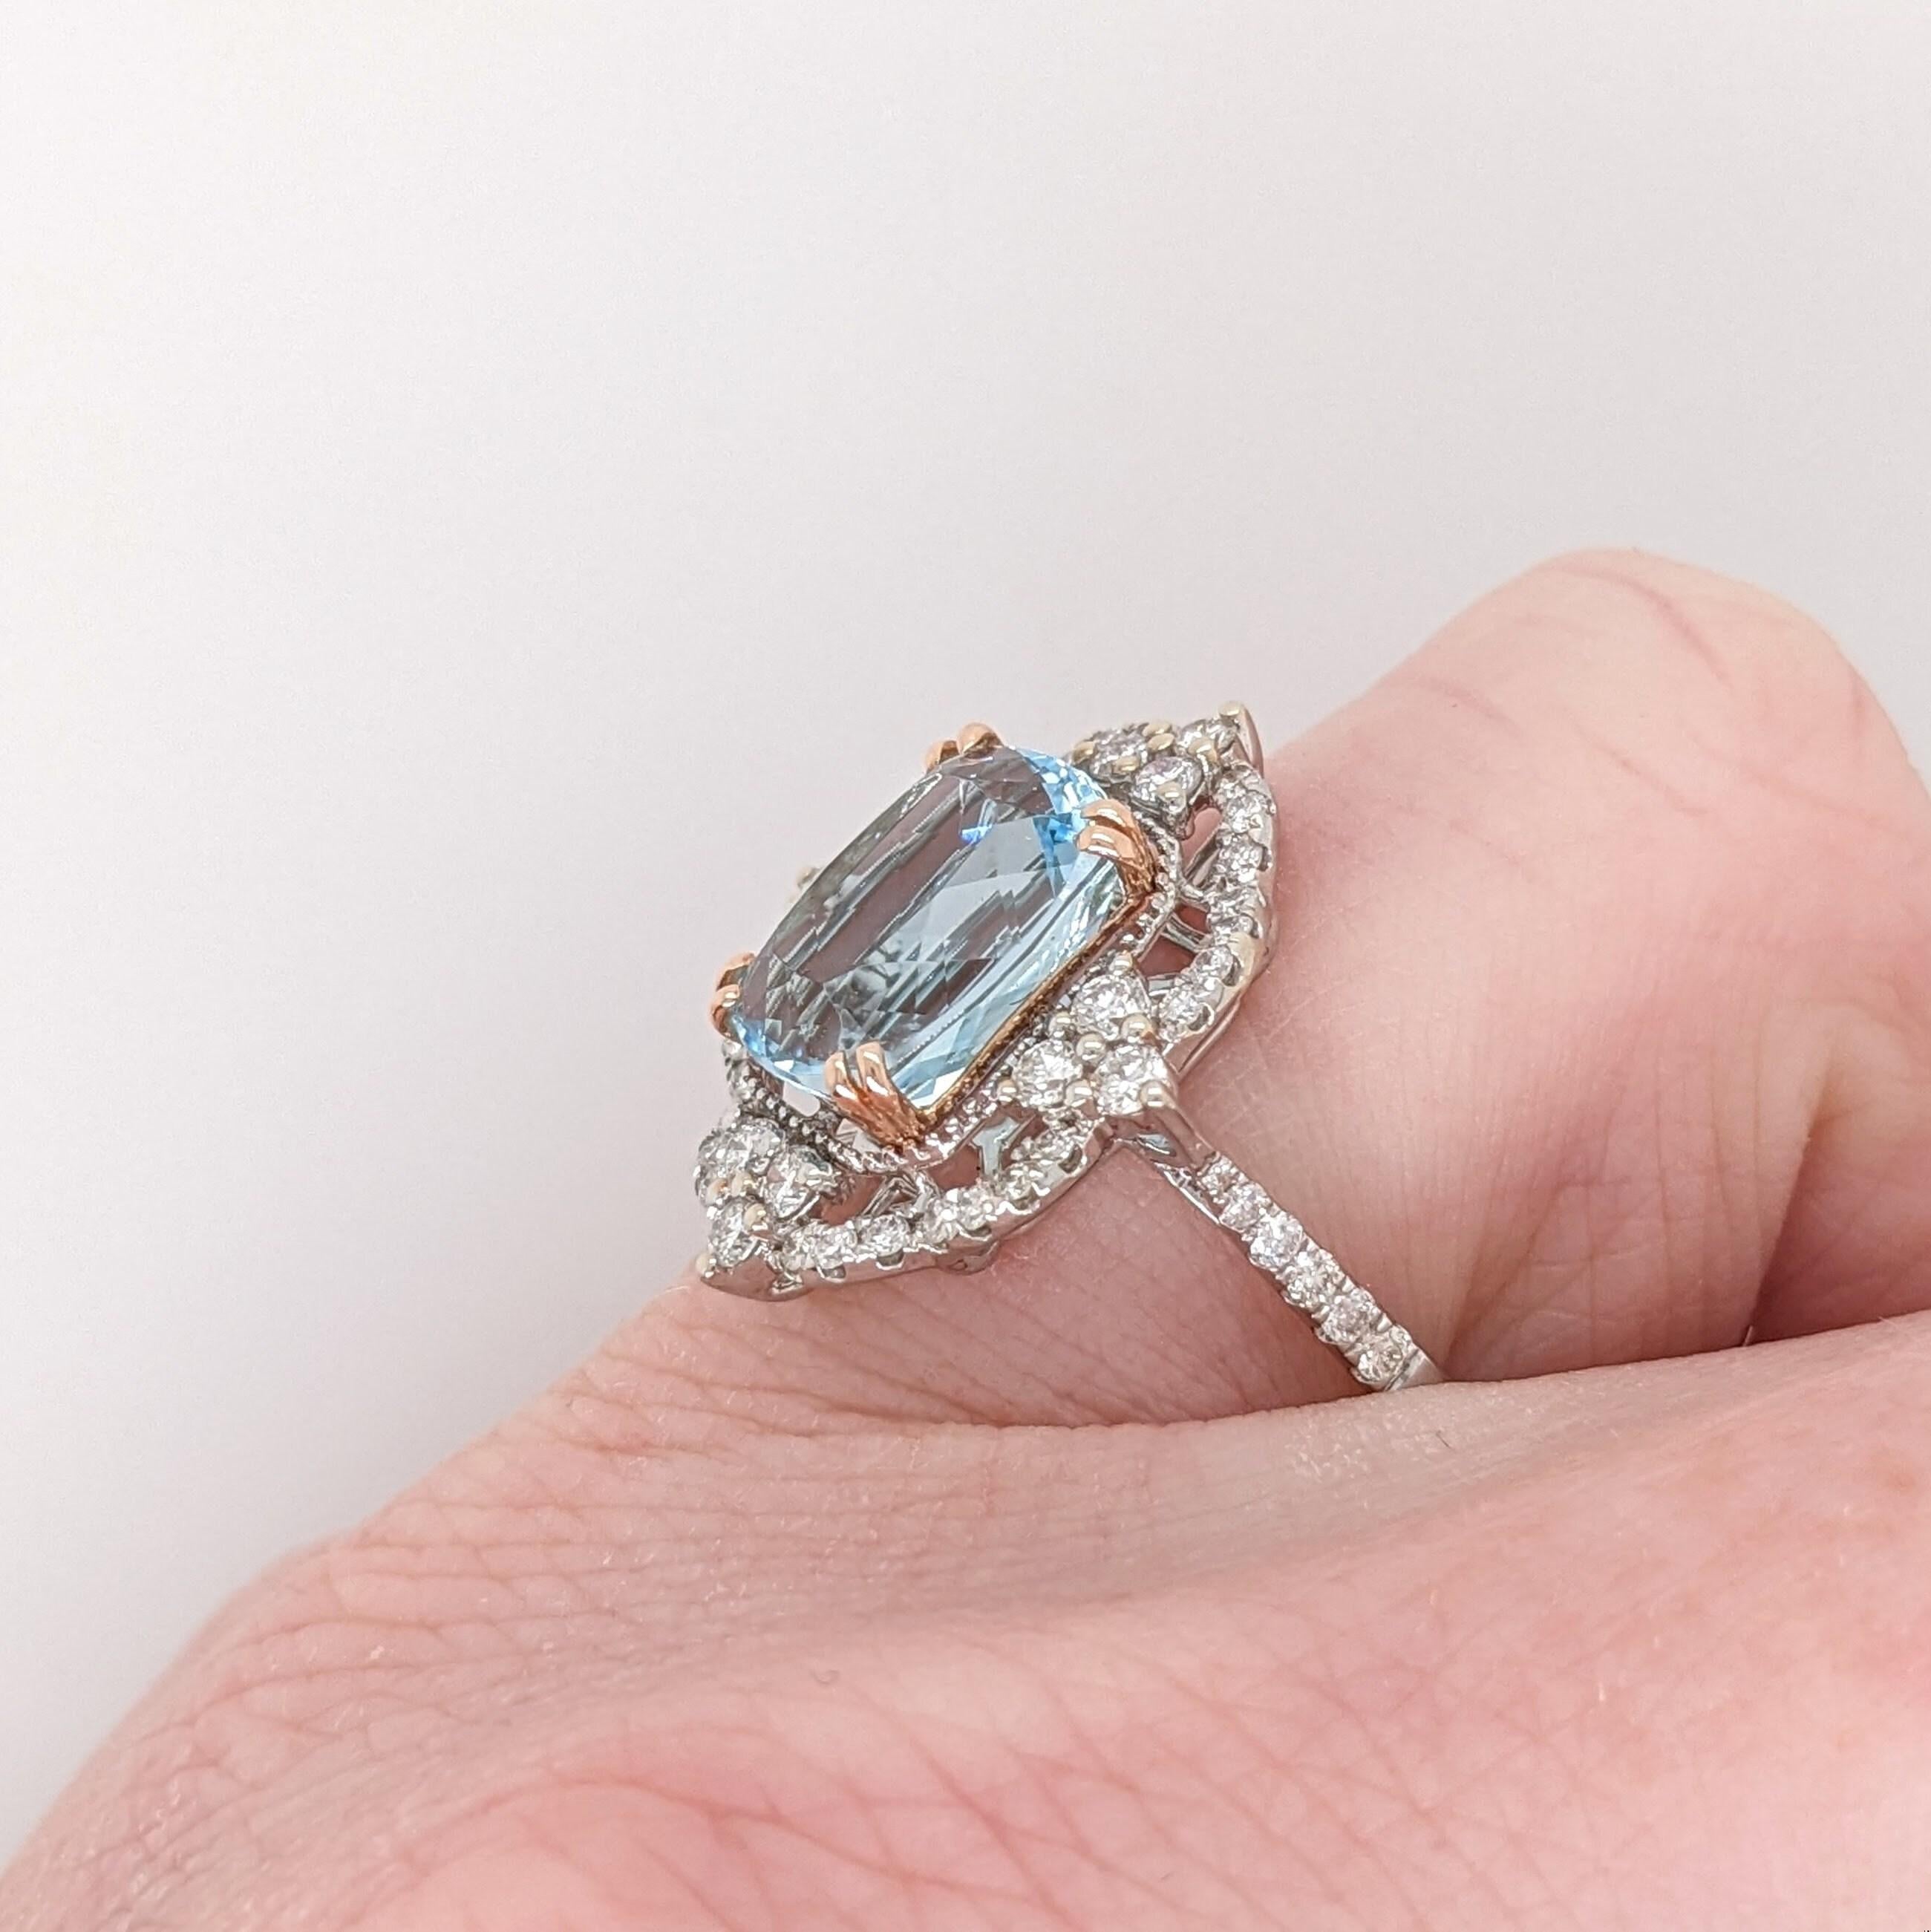 Stunning Aquamarine Ring in Solid 14K Dual Tone Gold with Natural Diamonds 3